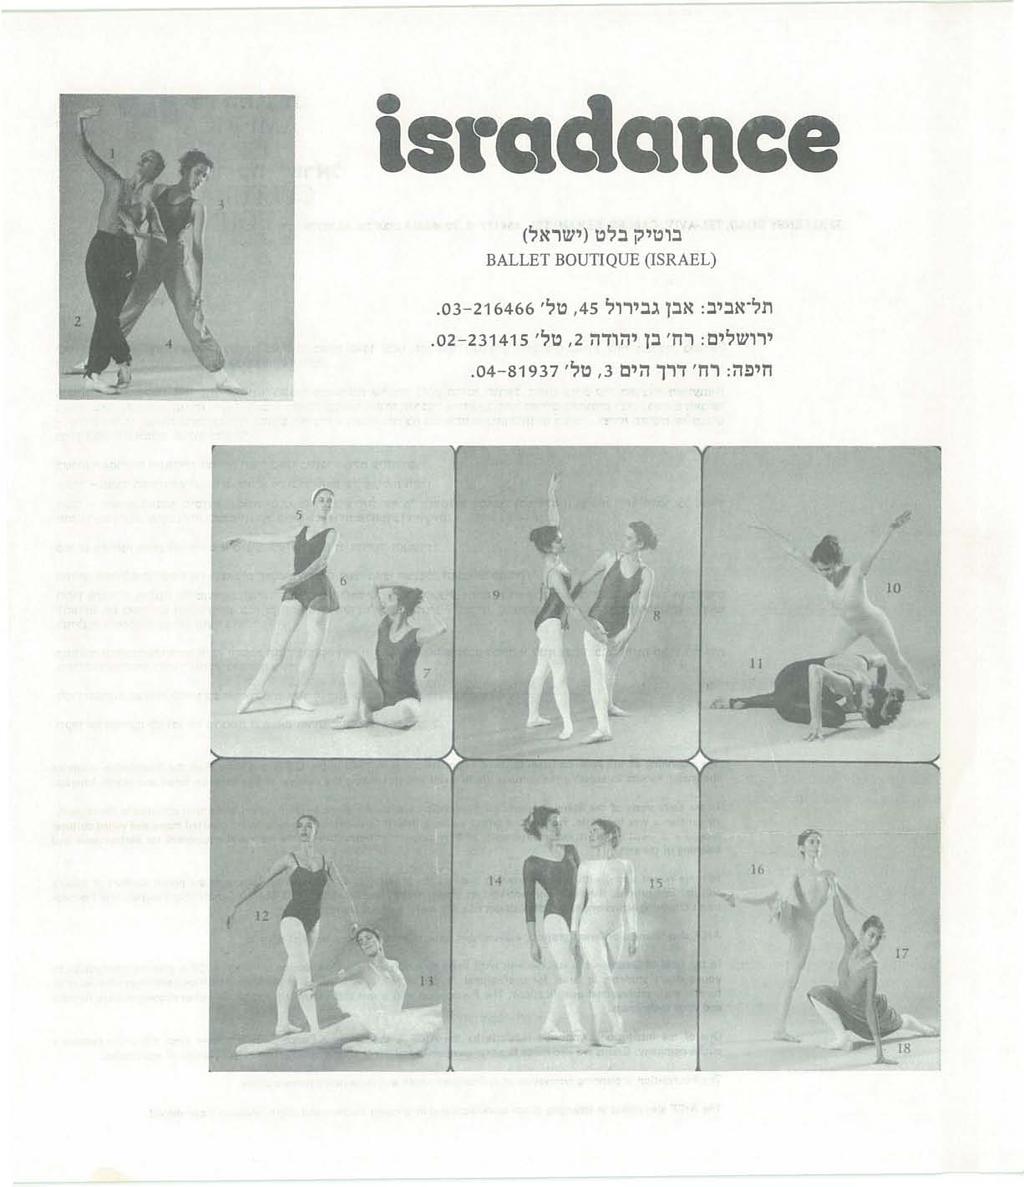 isradance בוטיק בלט (ישראל) BALLET BOUTIQUE (ISRAEL), 45 טל'. 03-216466, 2 טל'.